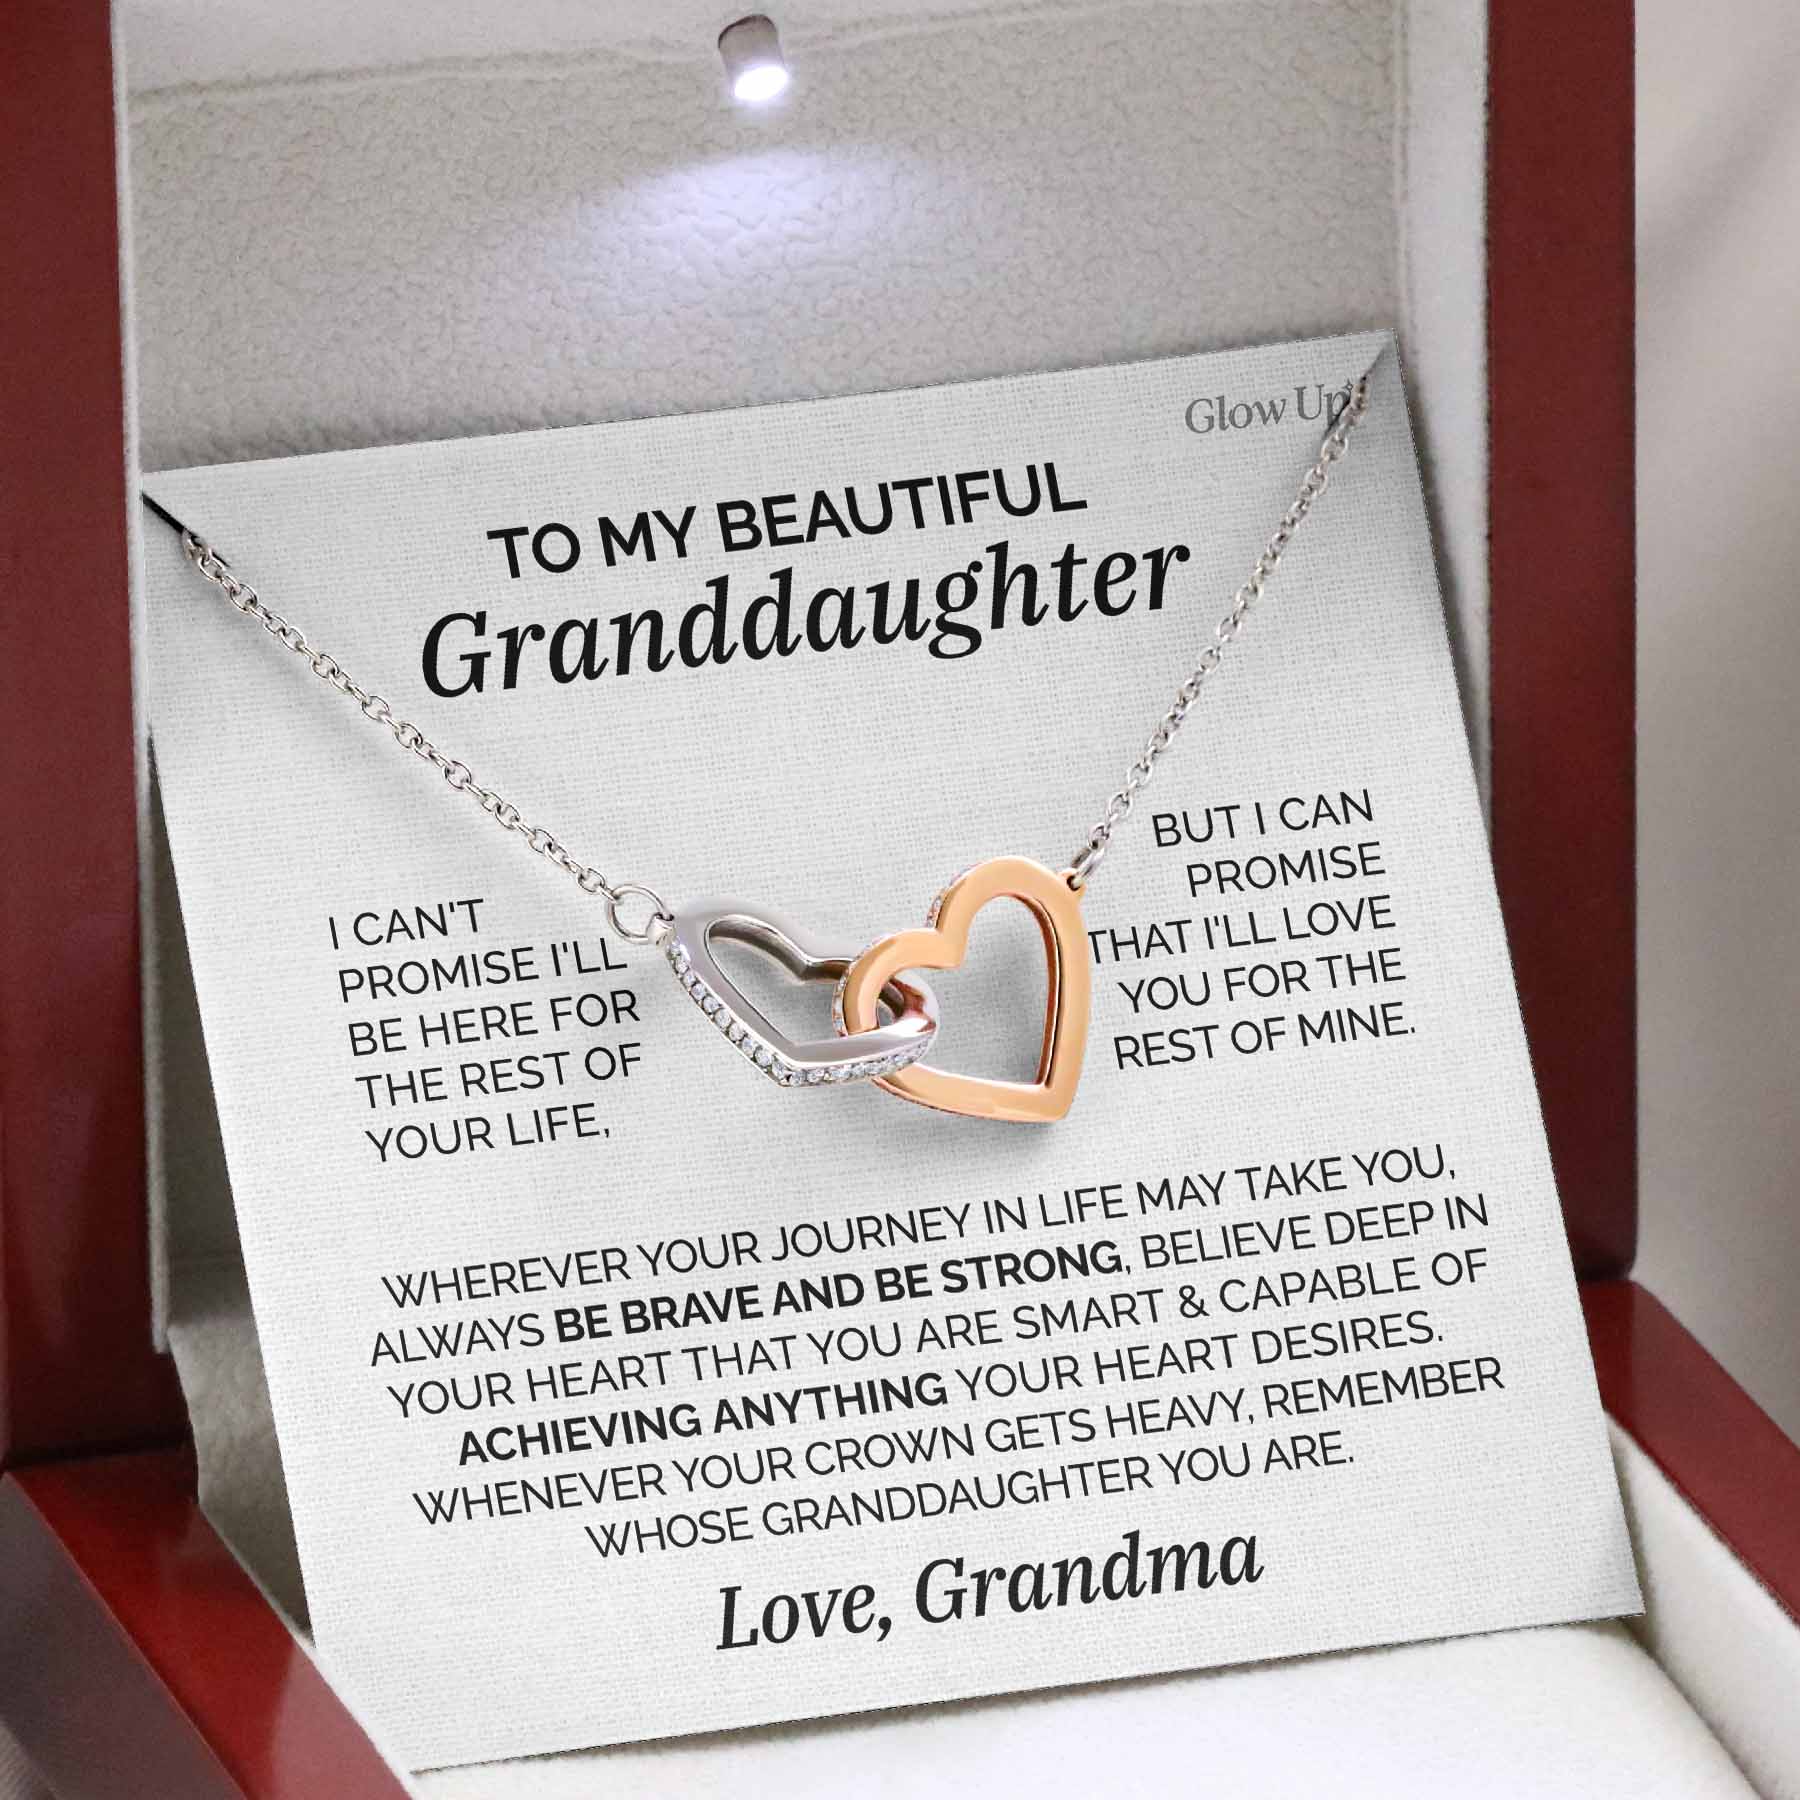 ShineOn Fulfillment Jewelry Polished Stainless Steel & Rose Gold Finish / Luxury LED Box To my GrandDaughter from Grandma - Be brave - Interlocking Necklace